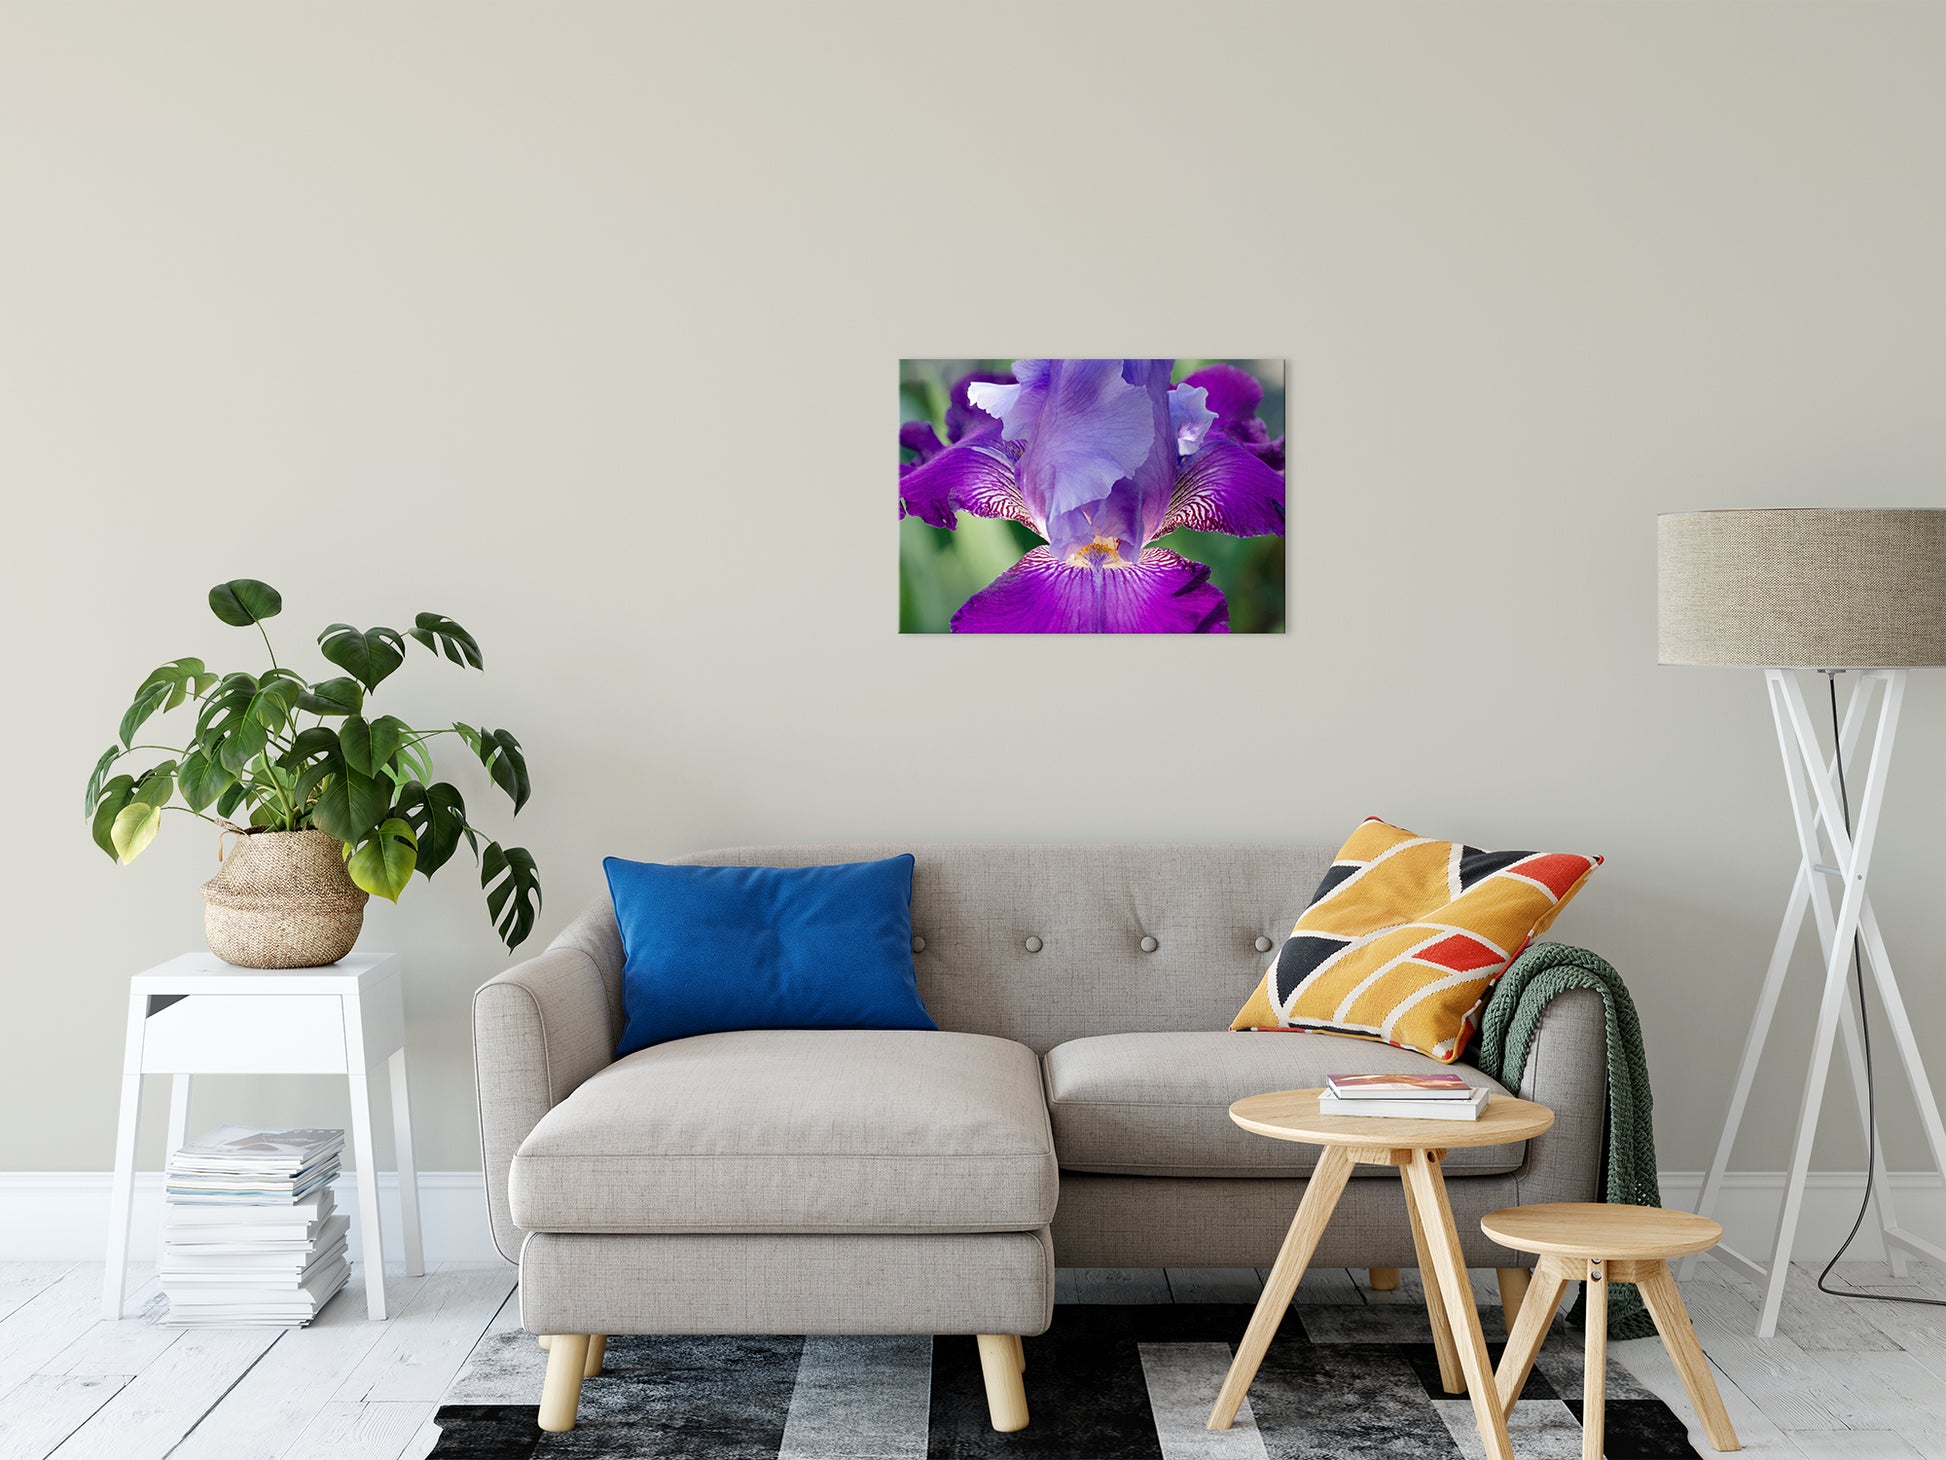 Large Wall Pictures For Bedroom: Glowing Iris Nature / Floral Photo Fine Art Canvas Wall Art Prints 20" x 30" - PIPAFINEART